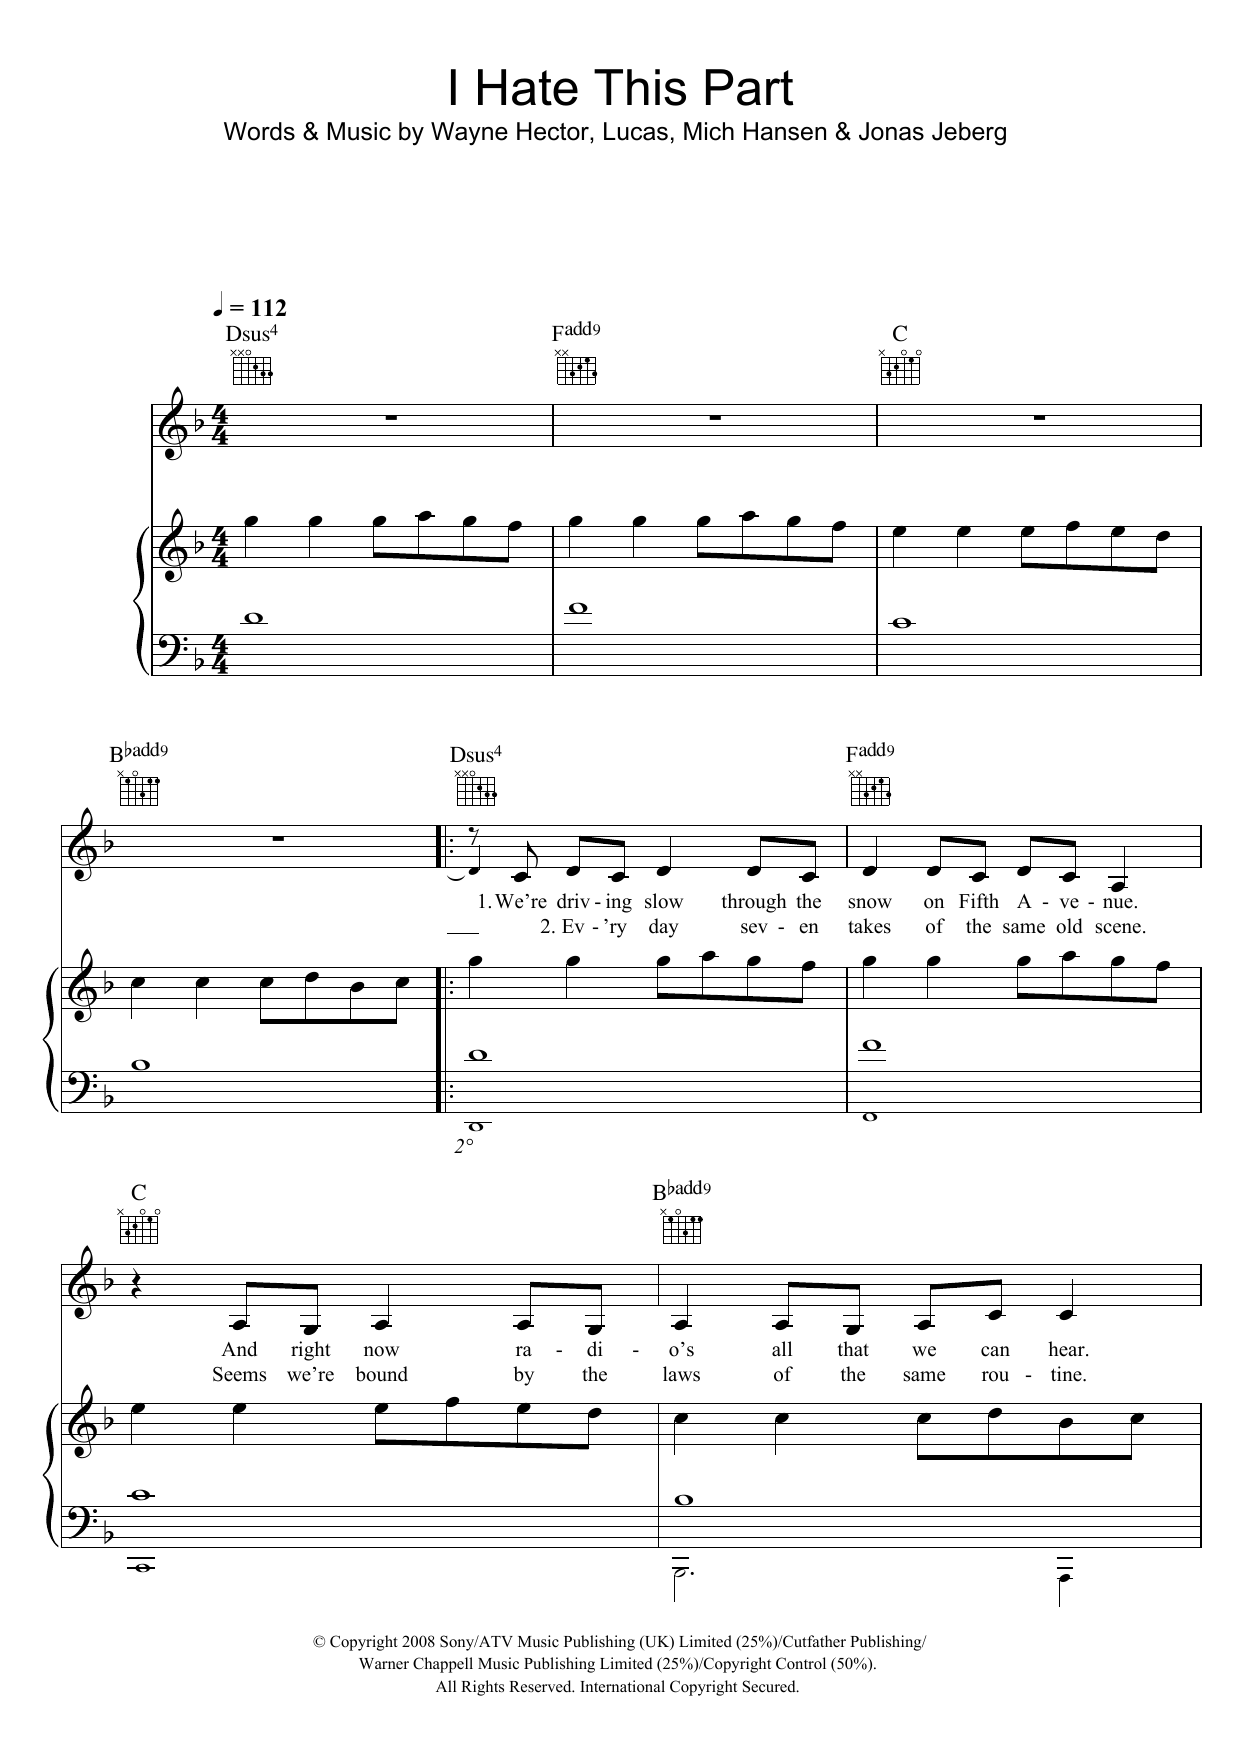 Download Pussycat Dolls I Hate This Part Sheet Music